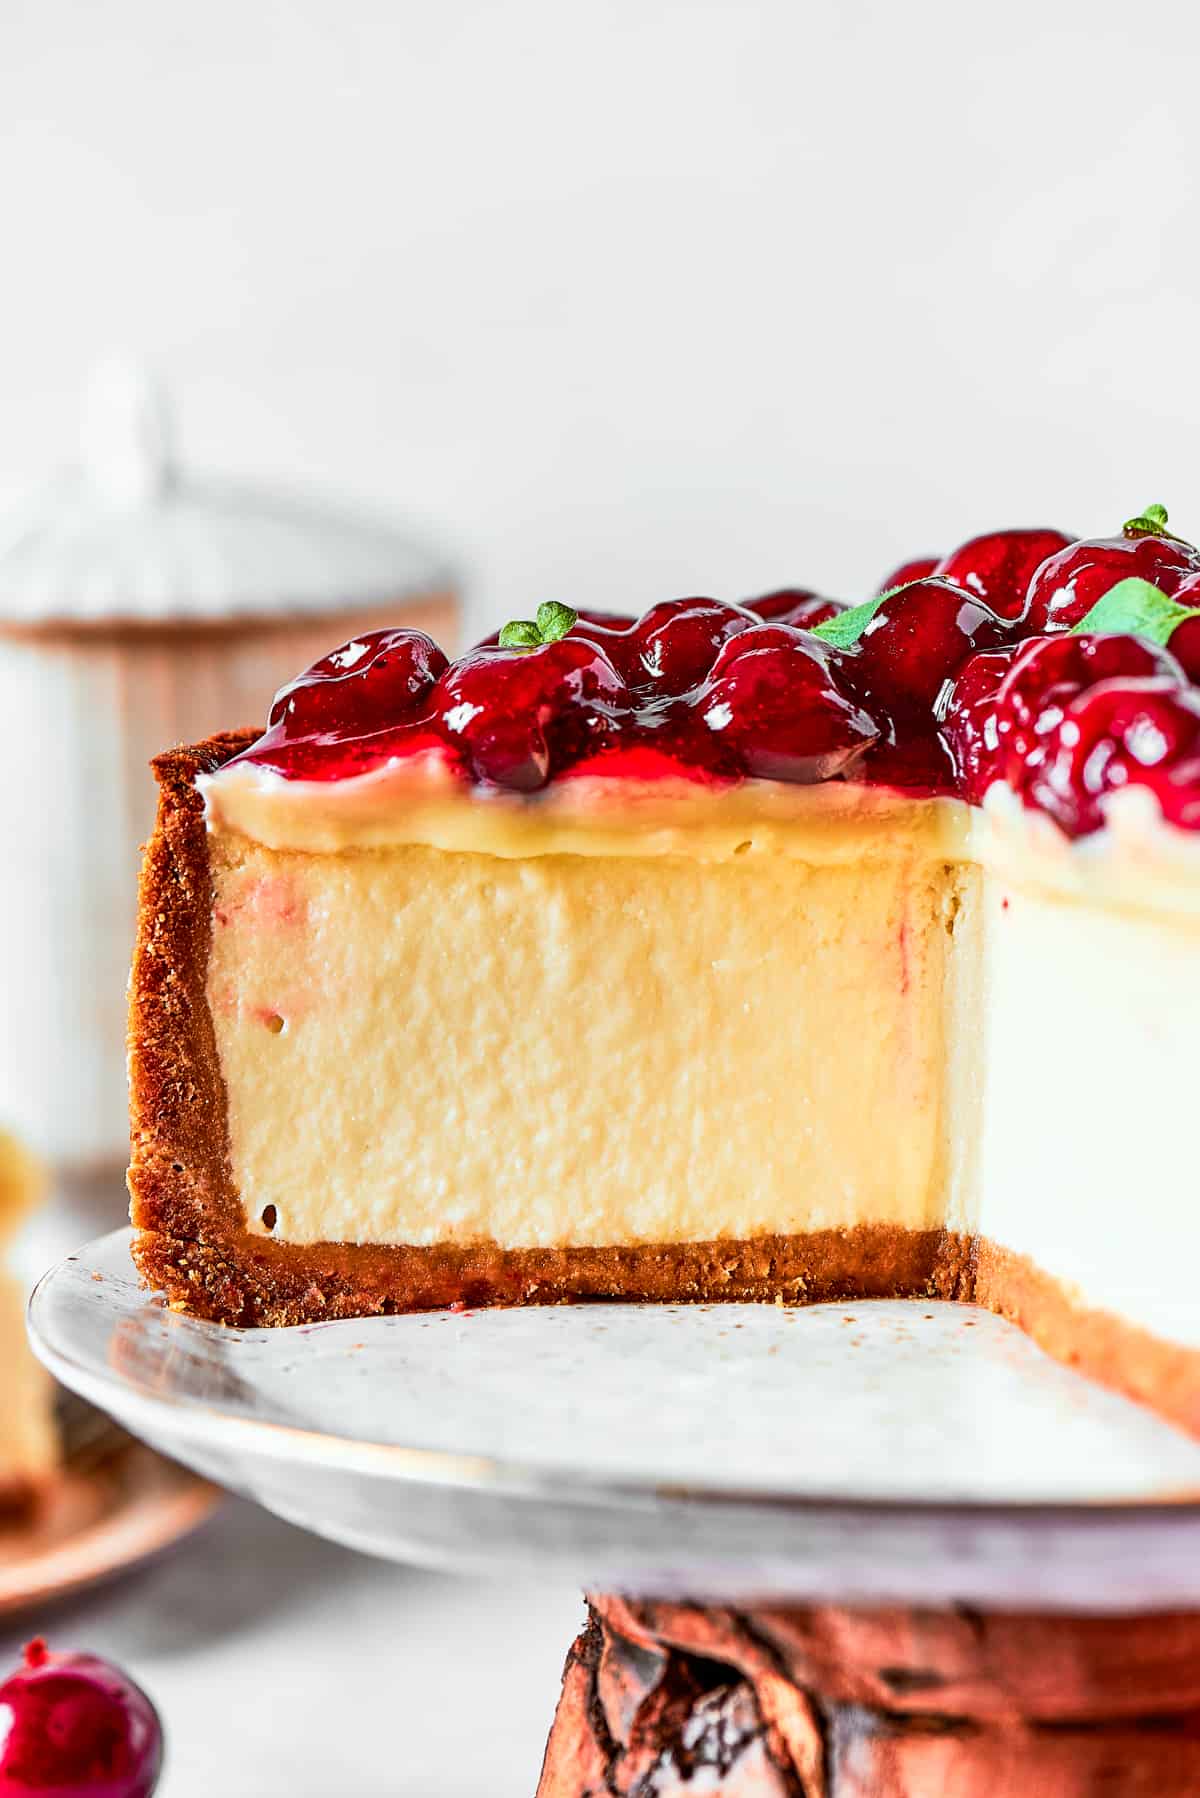 Close-up image of a cheesecake topped with cherries and placed on a cake stand.